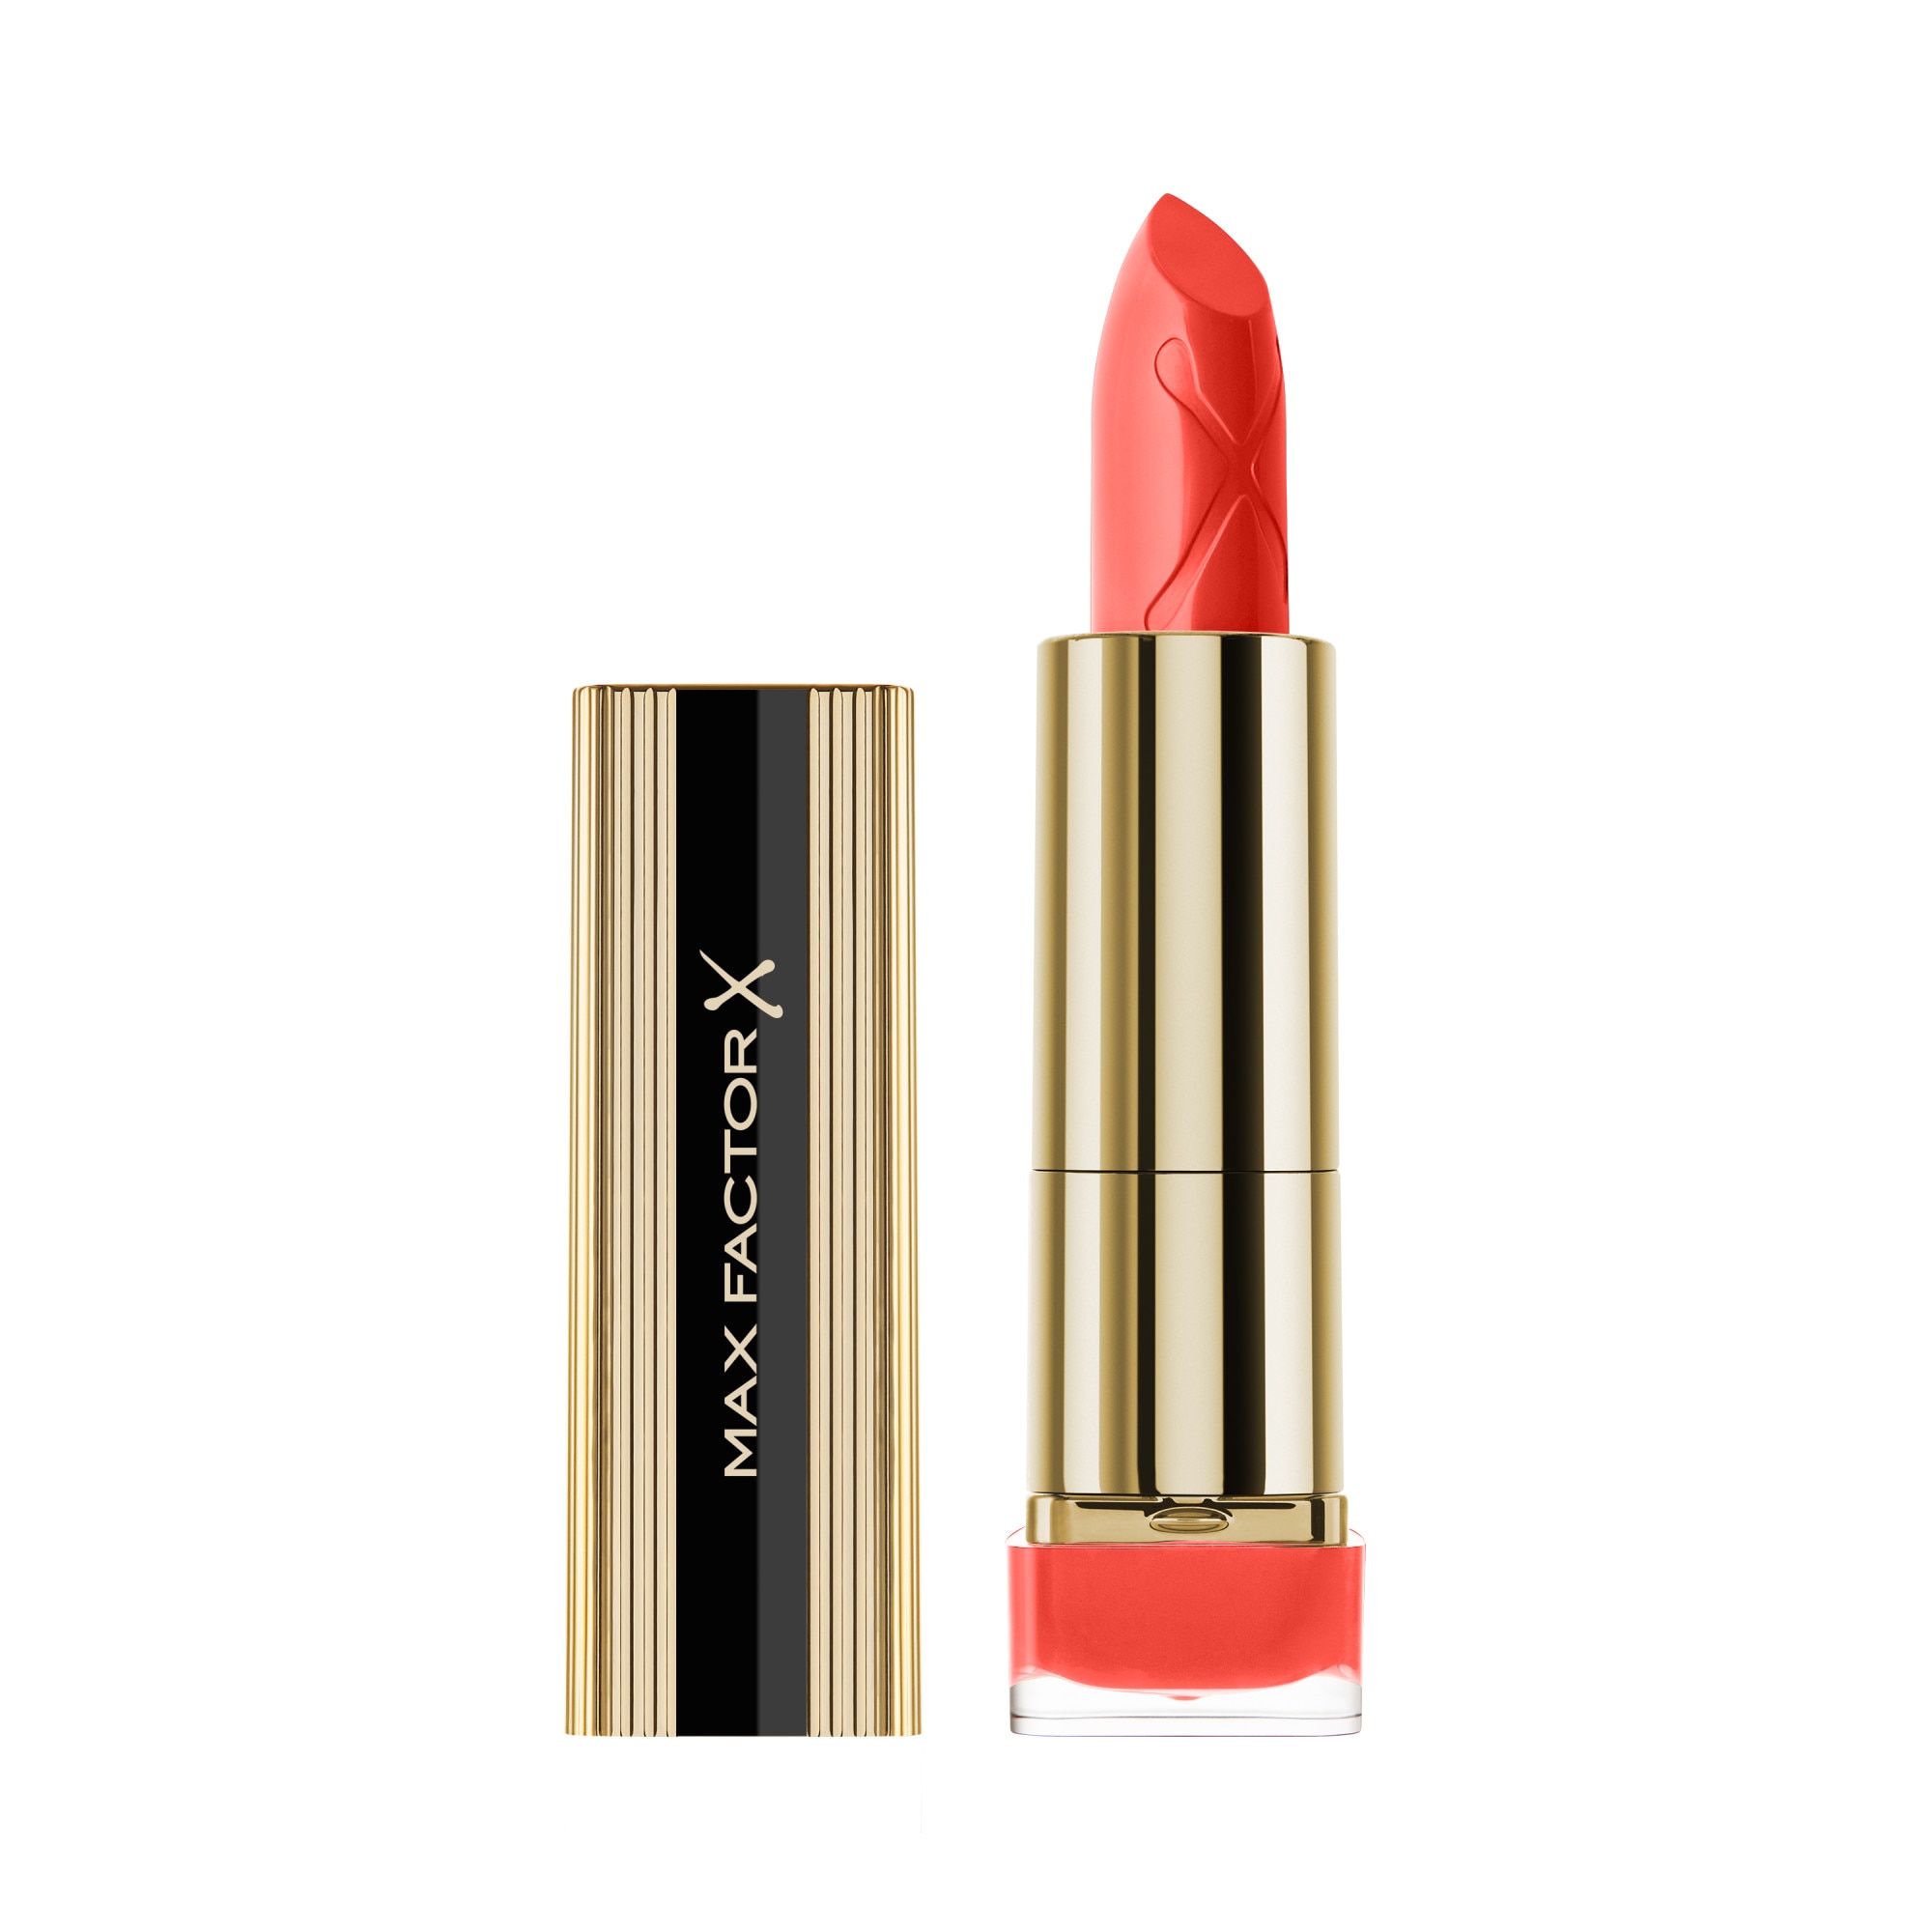 superstition Refusal Ligation Ruj Max Factor Colour Elixir Lipstick 060 Intensely Coral, 4 g - eMAG.ro